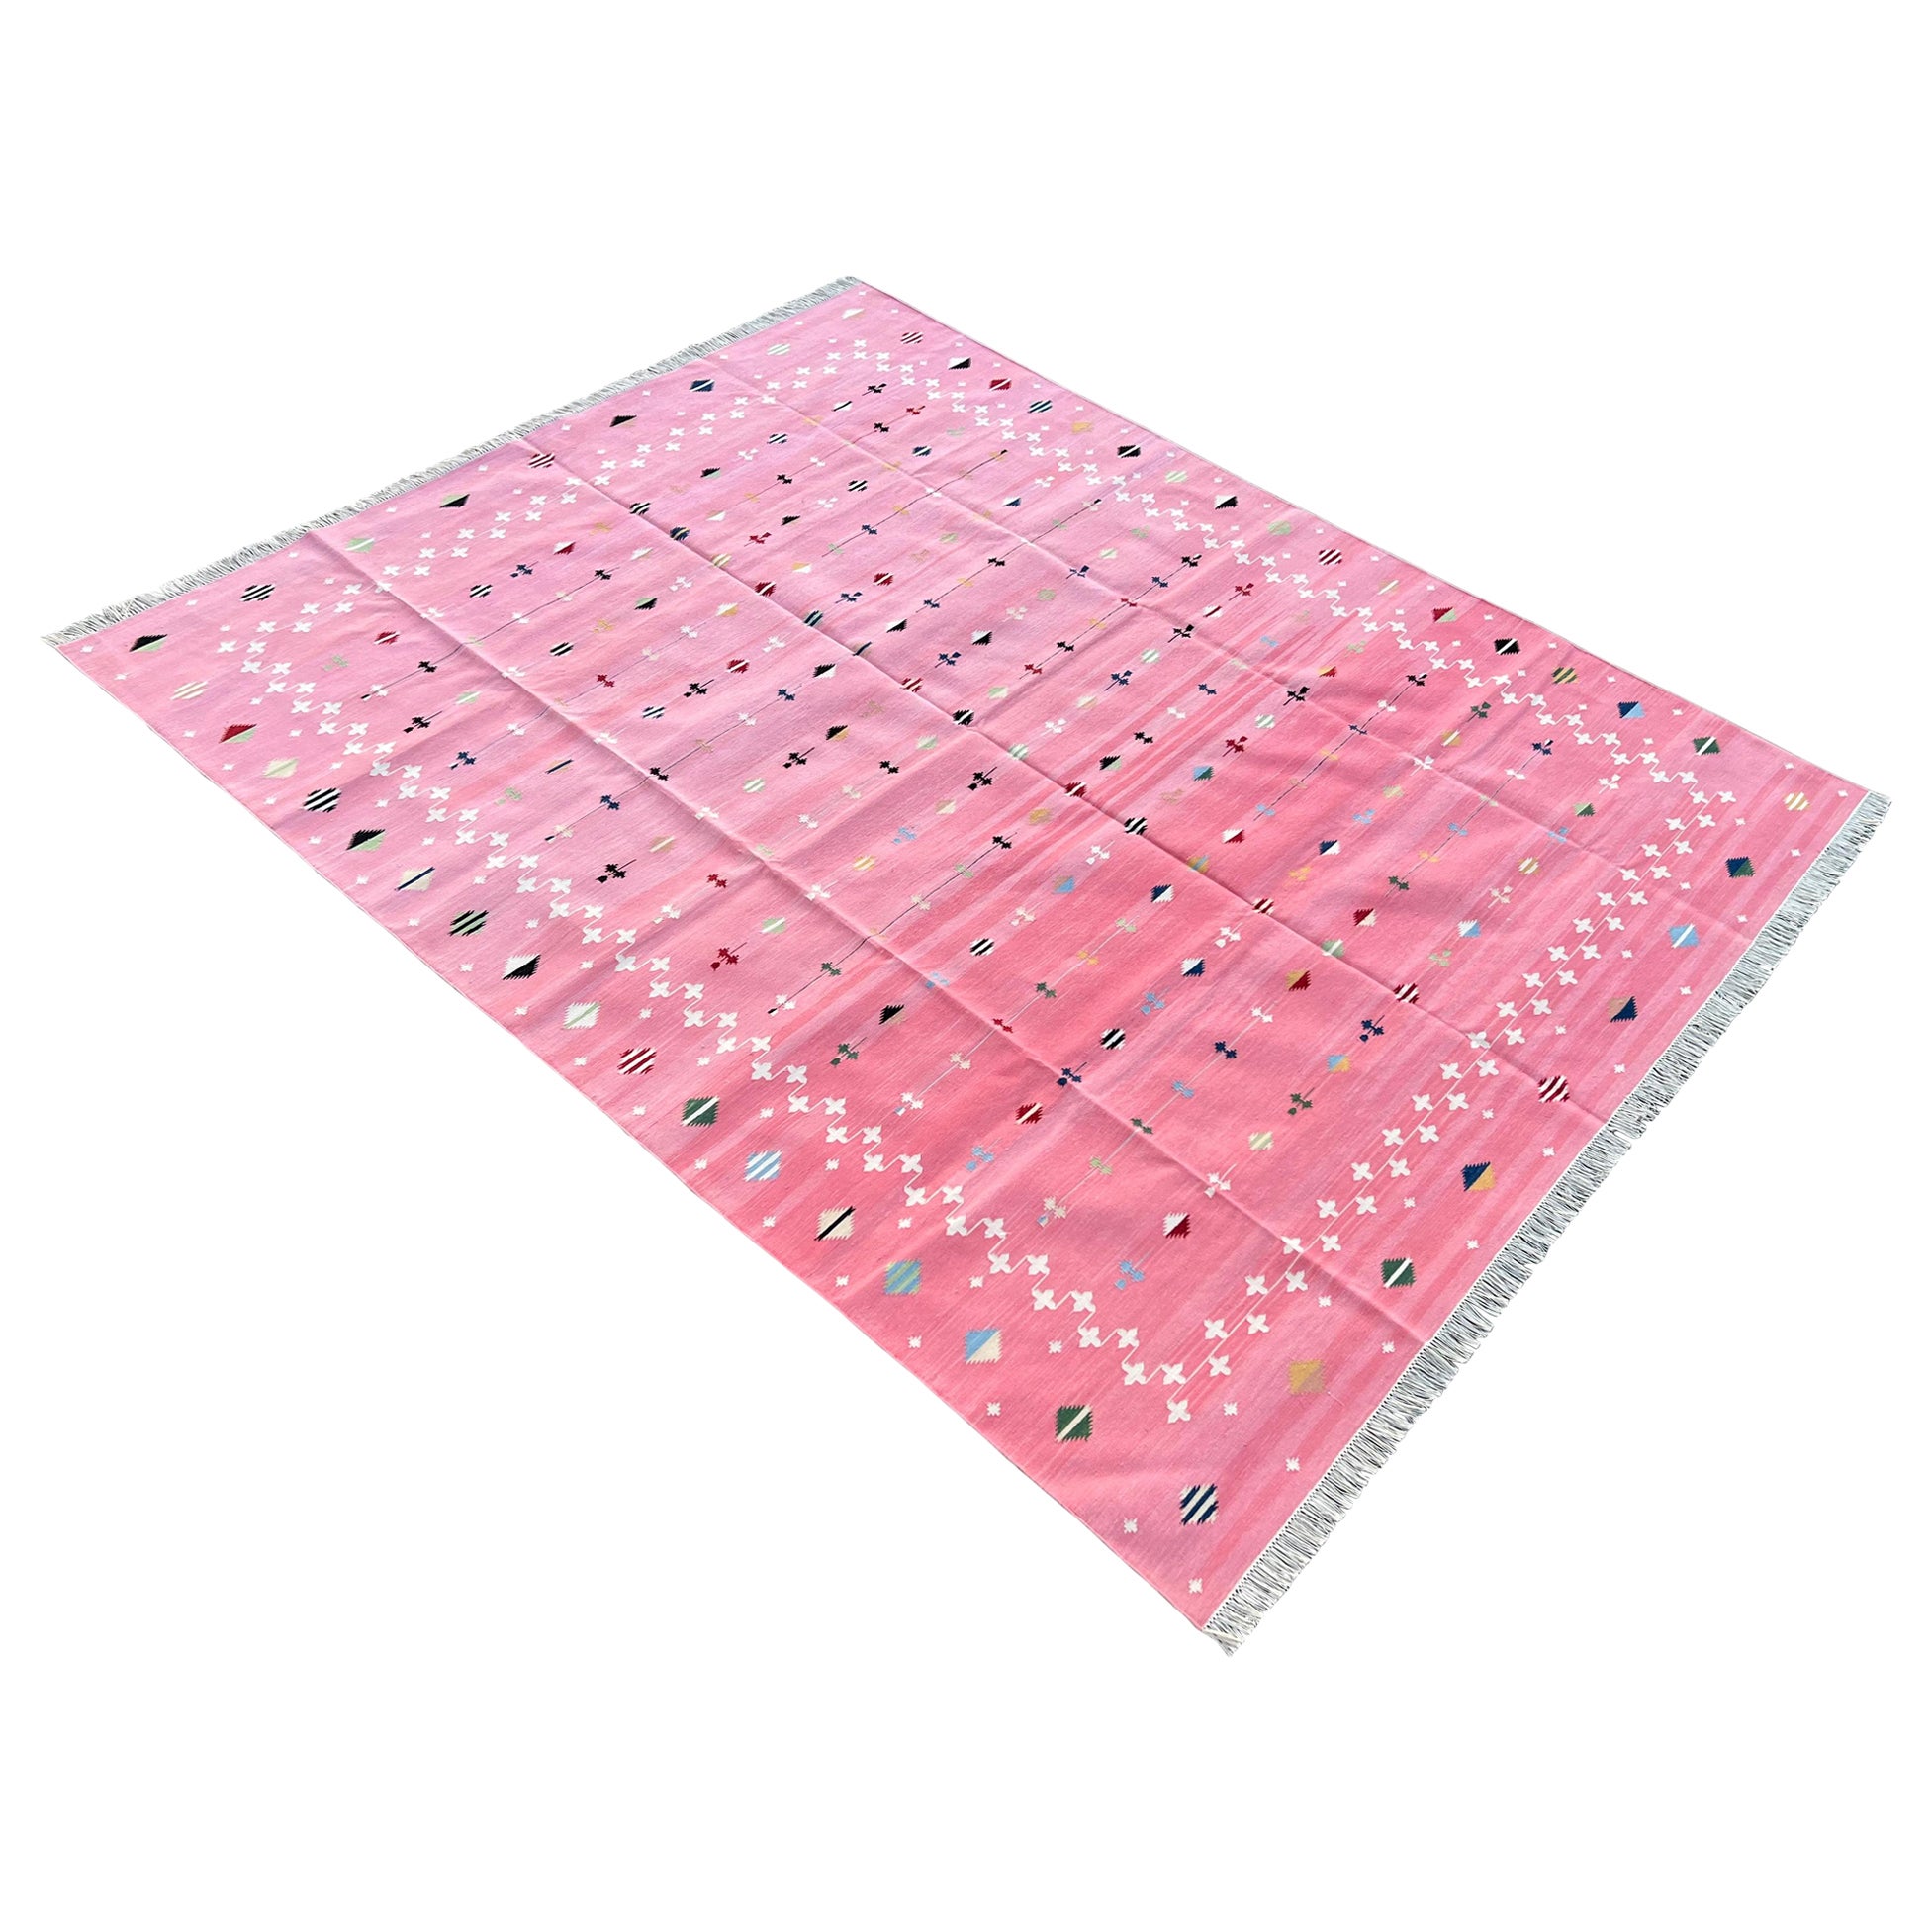 Handmade Cotton Area Flat Weave Rug, 8x10 Pink And White Shooting Star Dhurrie